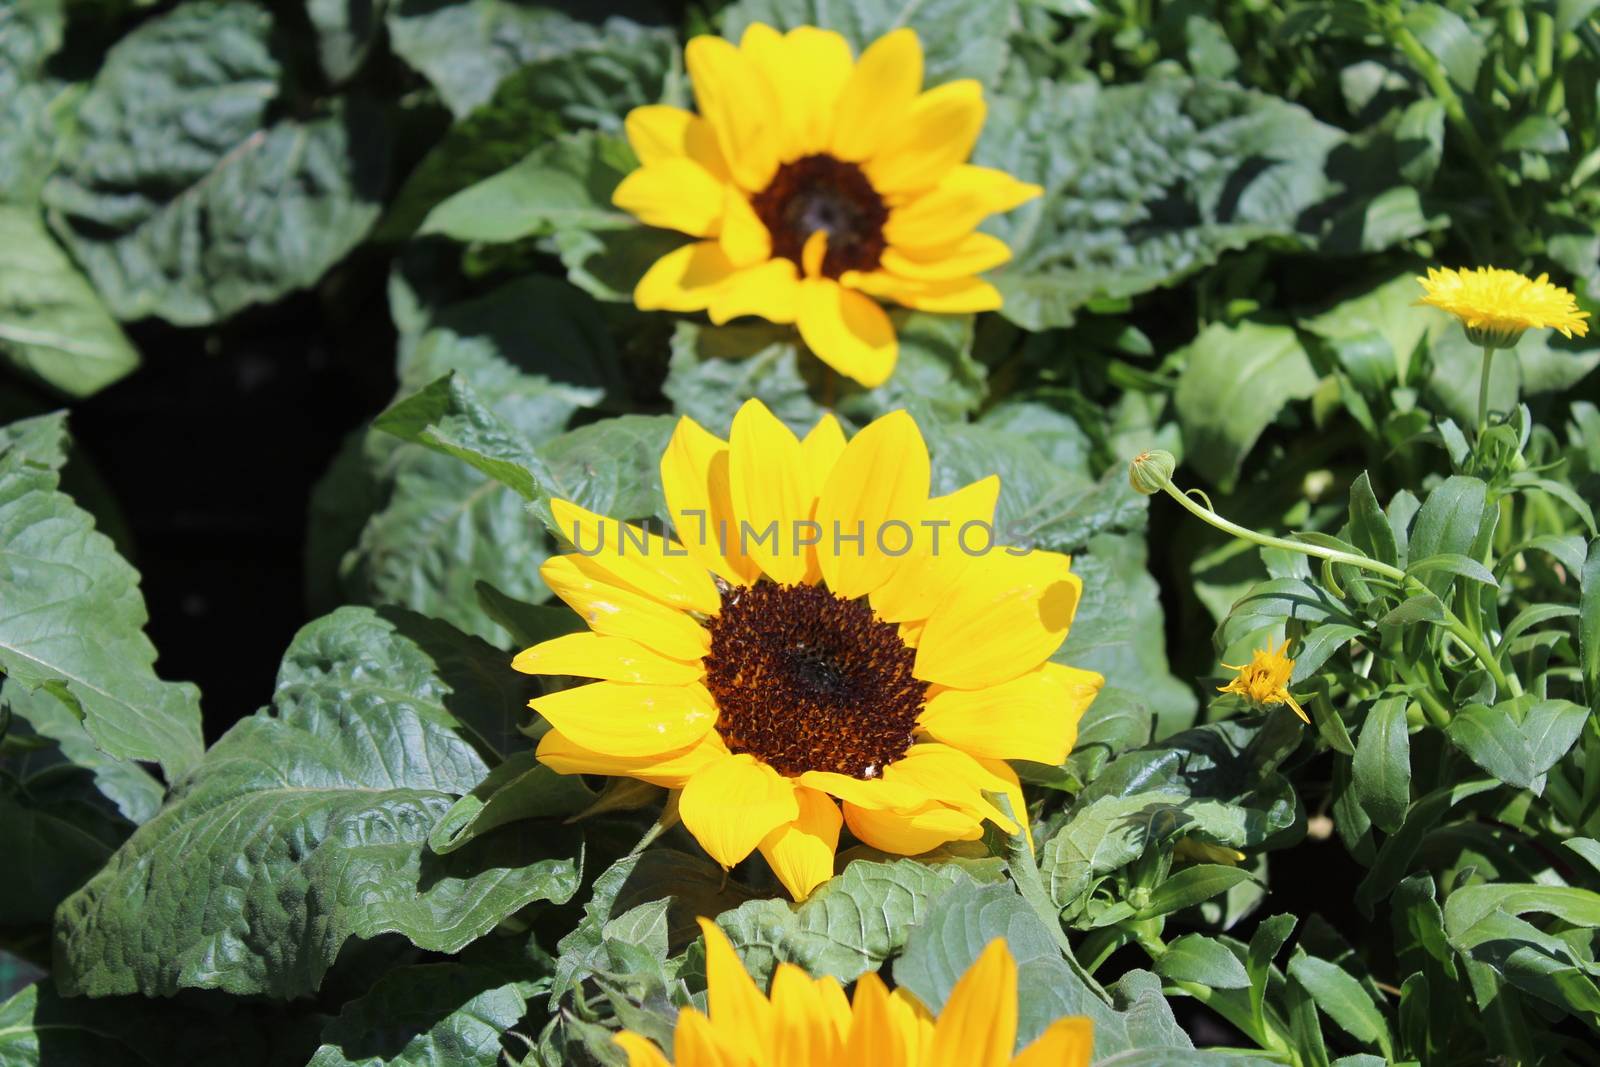 The picture shows little sunflowers in the garden